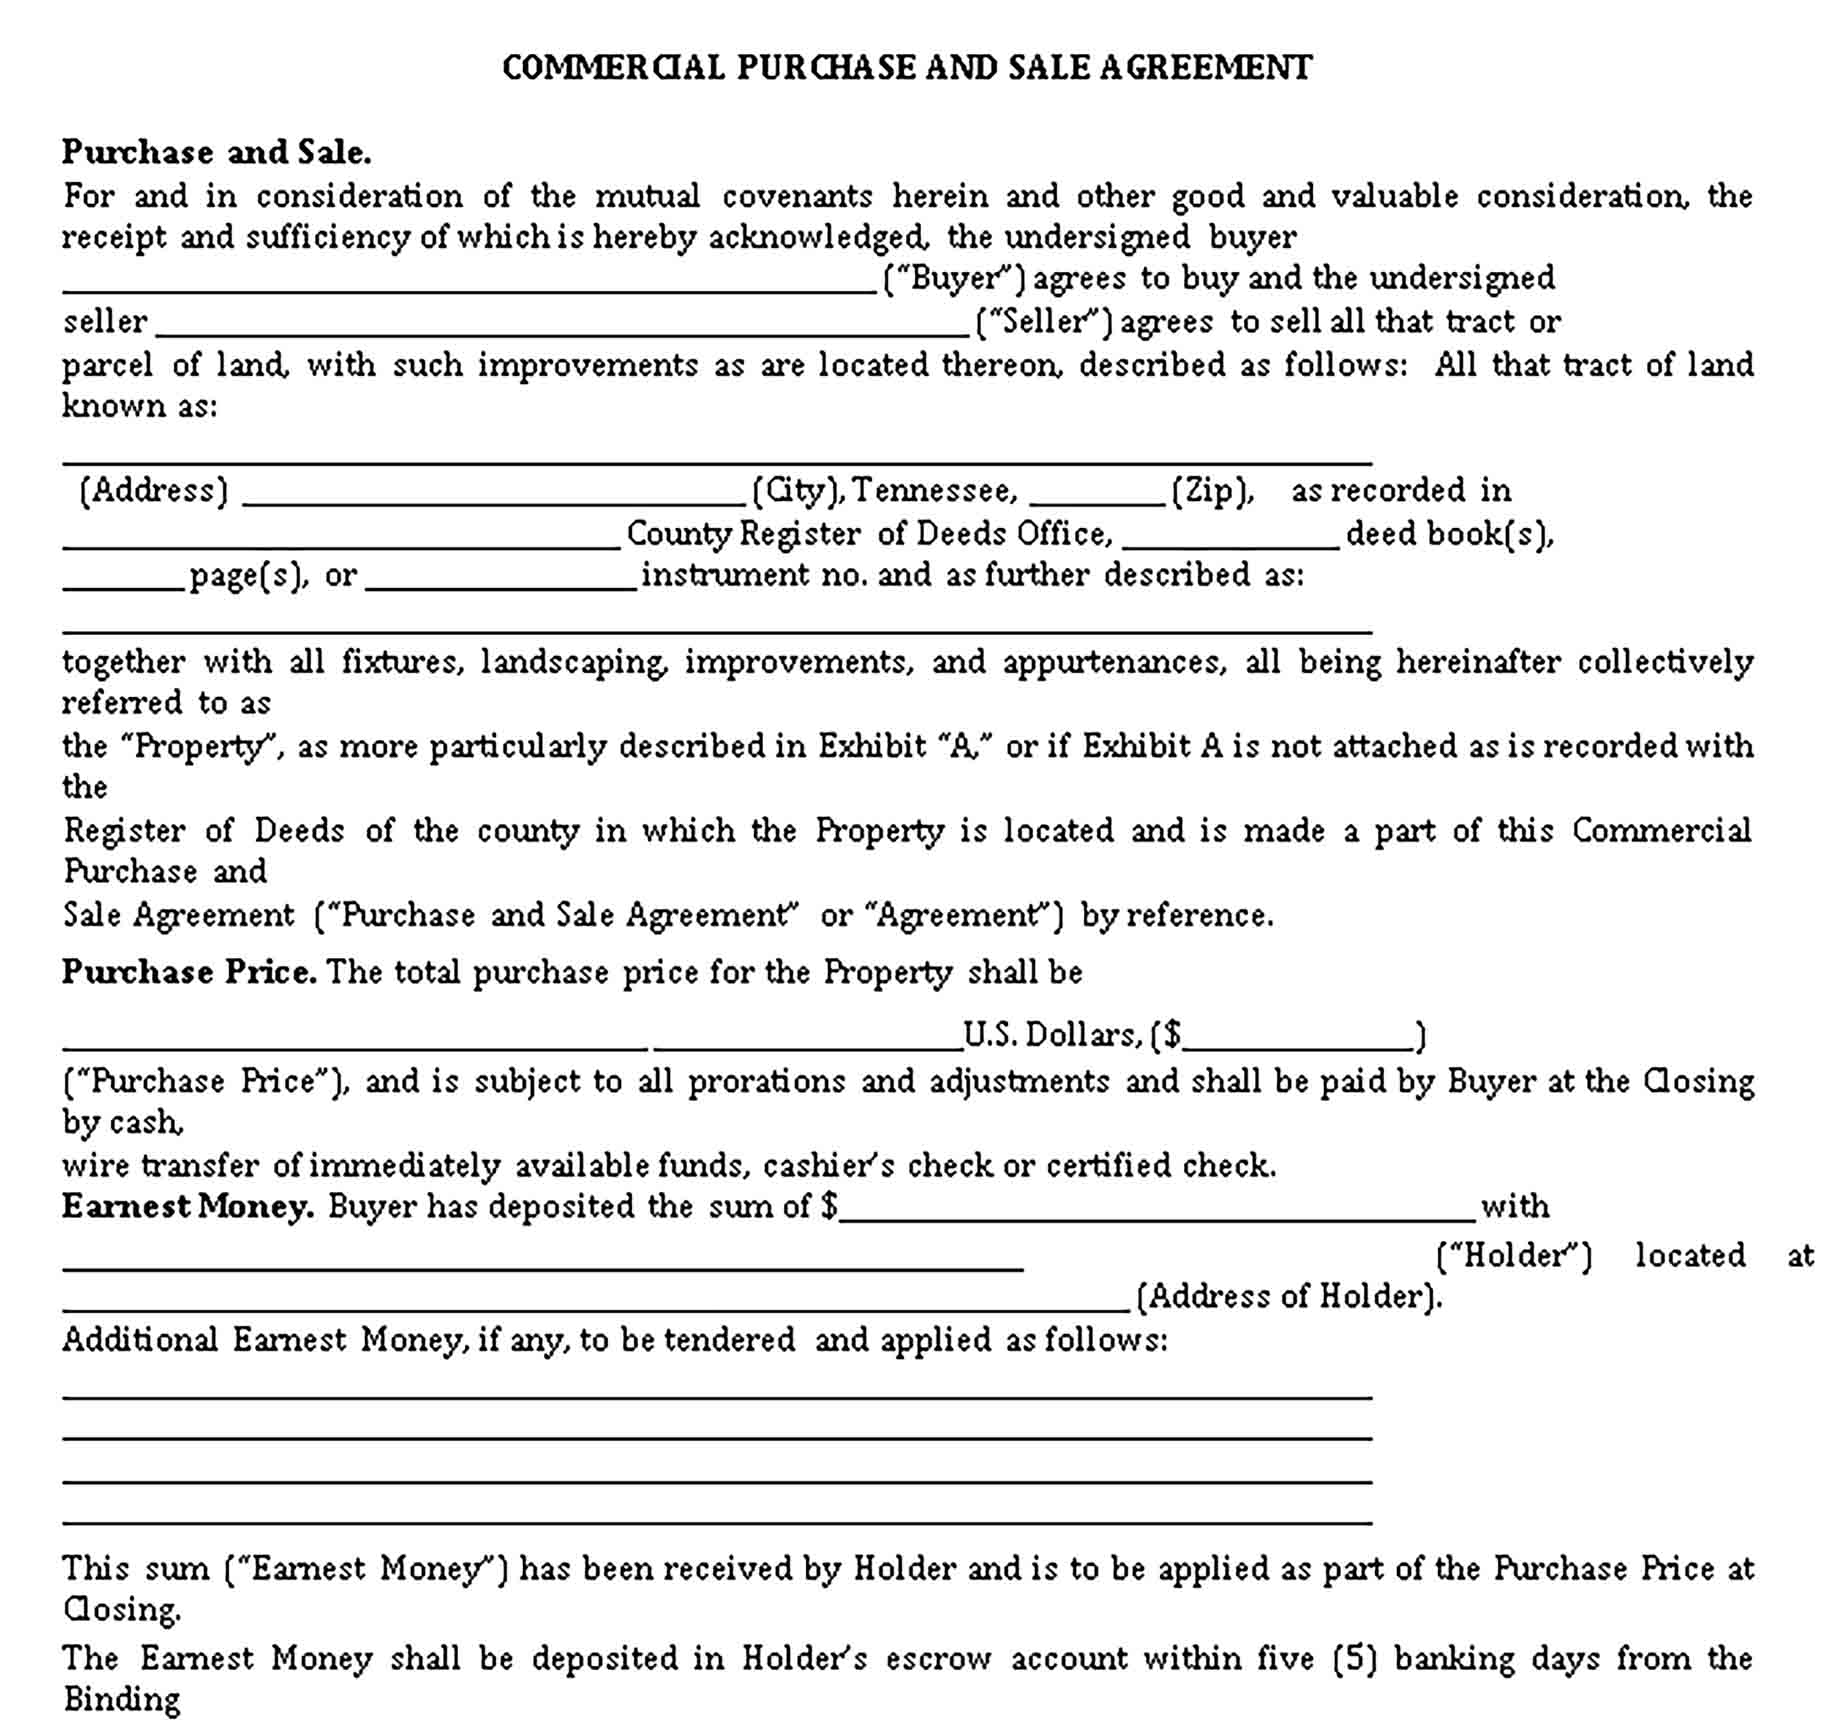 Templates Commercial Purchase and Sale Agreement Sample